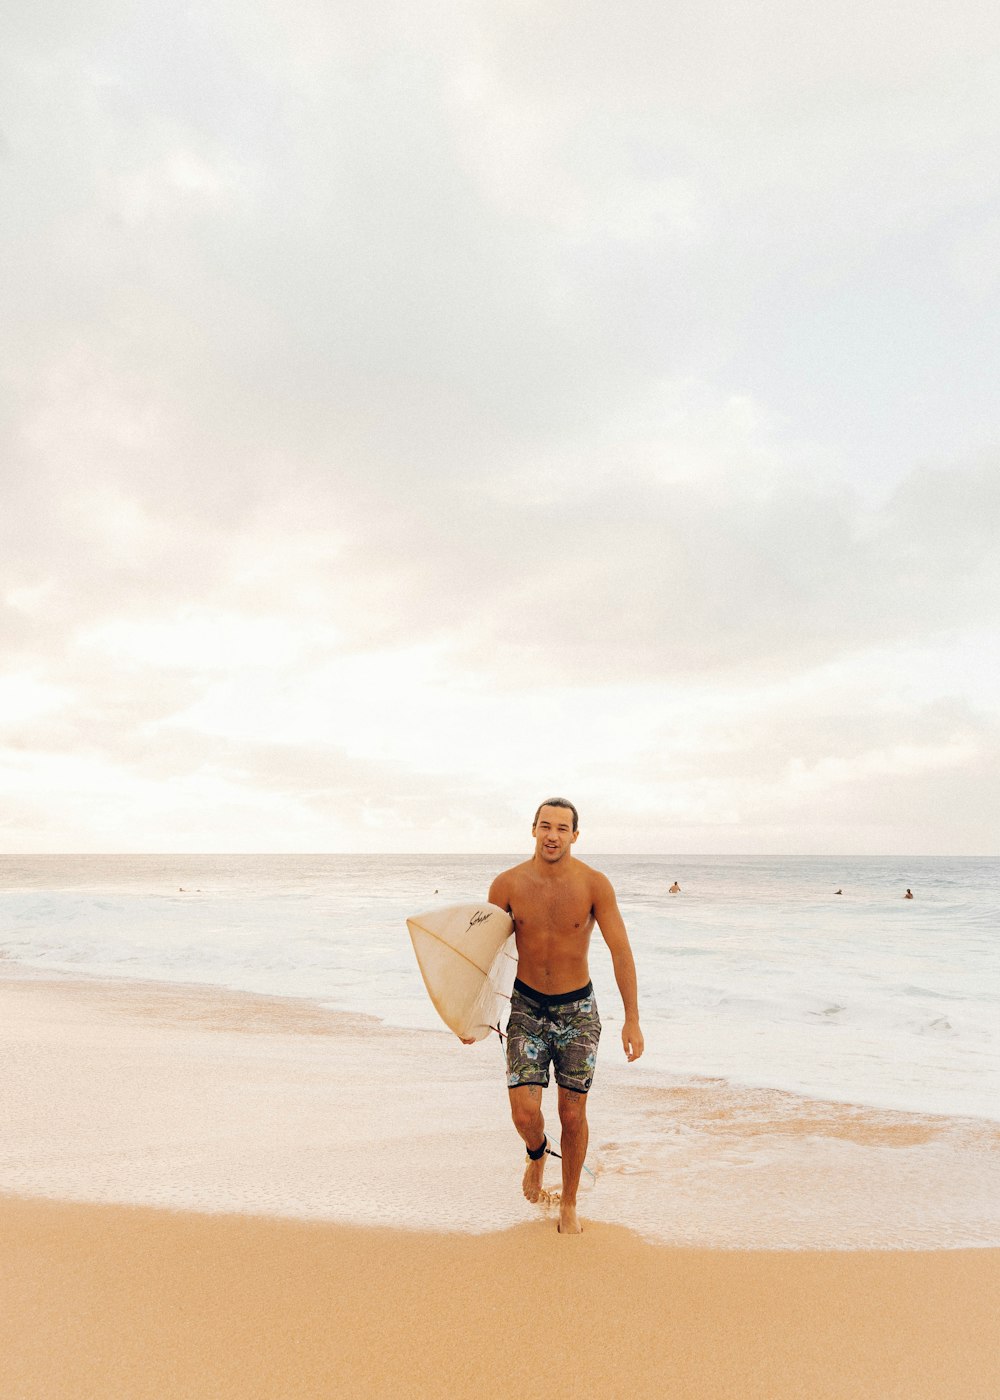 man in black shorts holding white surfboard standing on beach during daytime